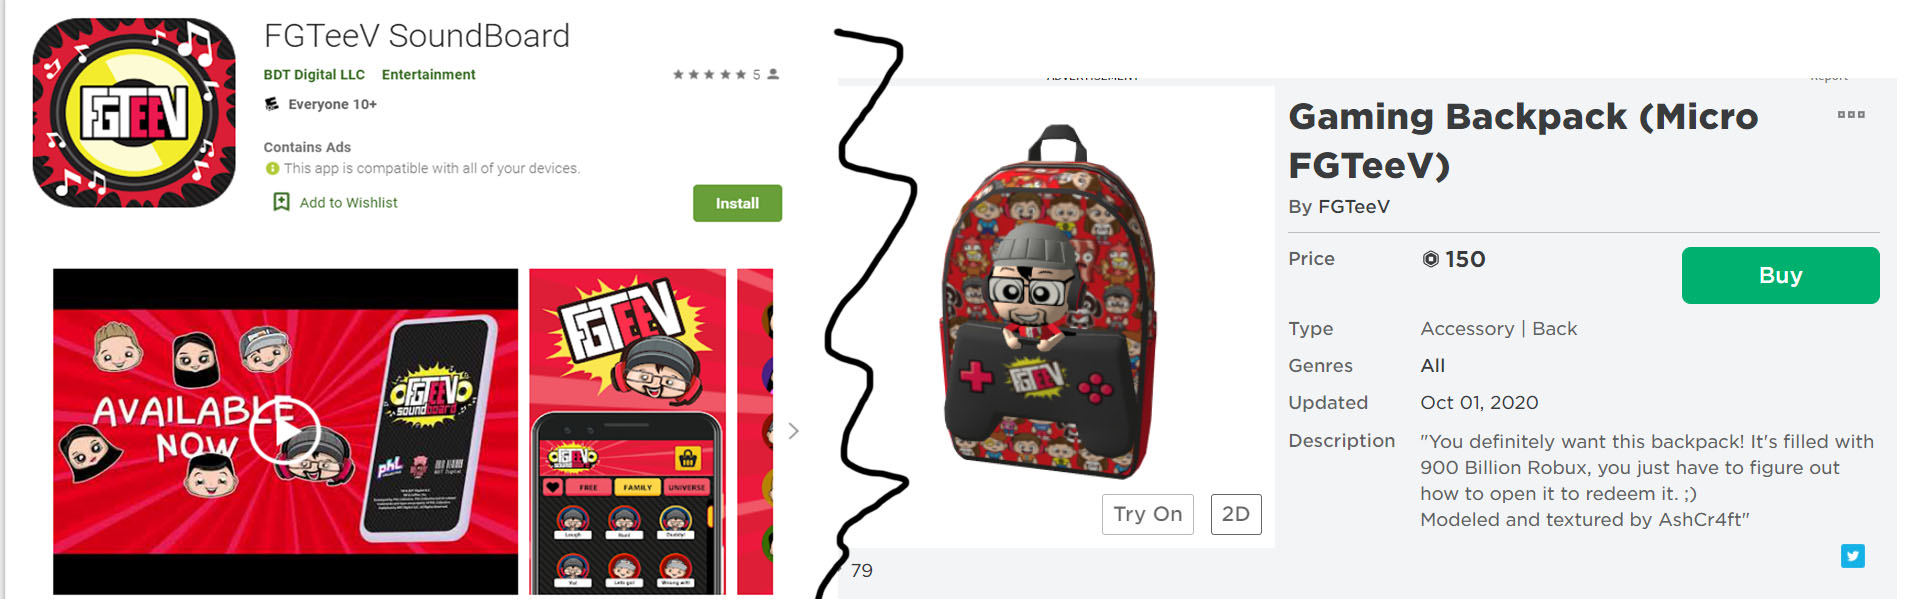 Fgteev On Twitter Both Of These Came Out Today Roblox Ugc Fgteev Backpack Our New Soundboard App By Phlcollective Which One You Gonna Get Both App Https T Co Vixywwdwbf Roblox Backpack Https T Co Dw3emhncvz - roblox backpack icon